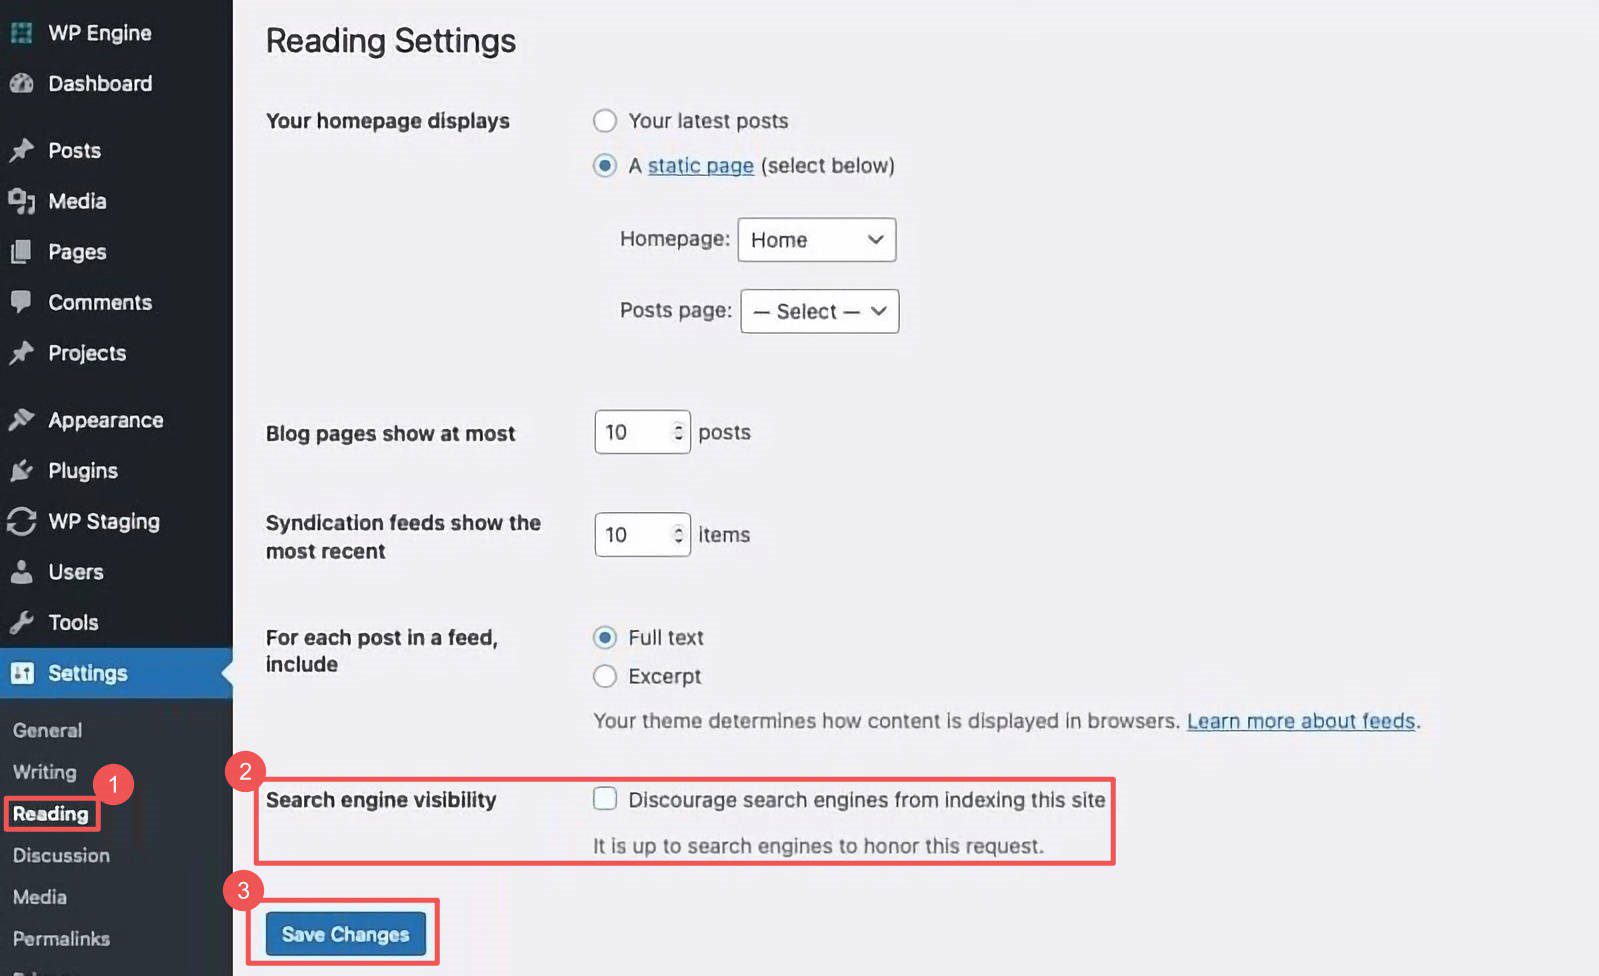 Discourage Search Visibility - WordPress Reading Settings